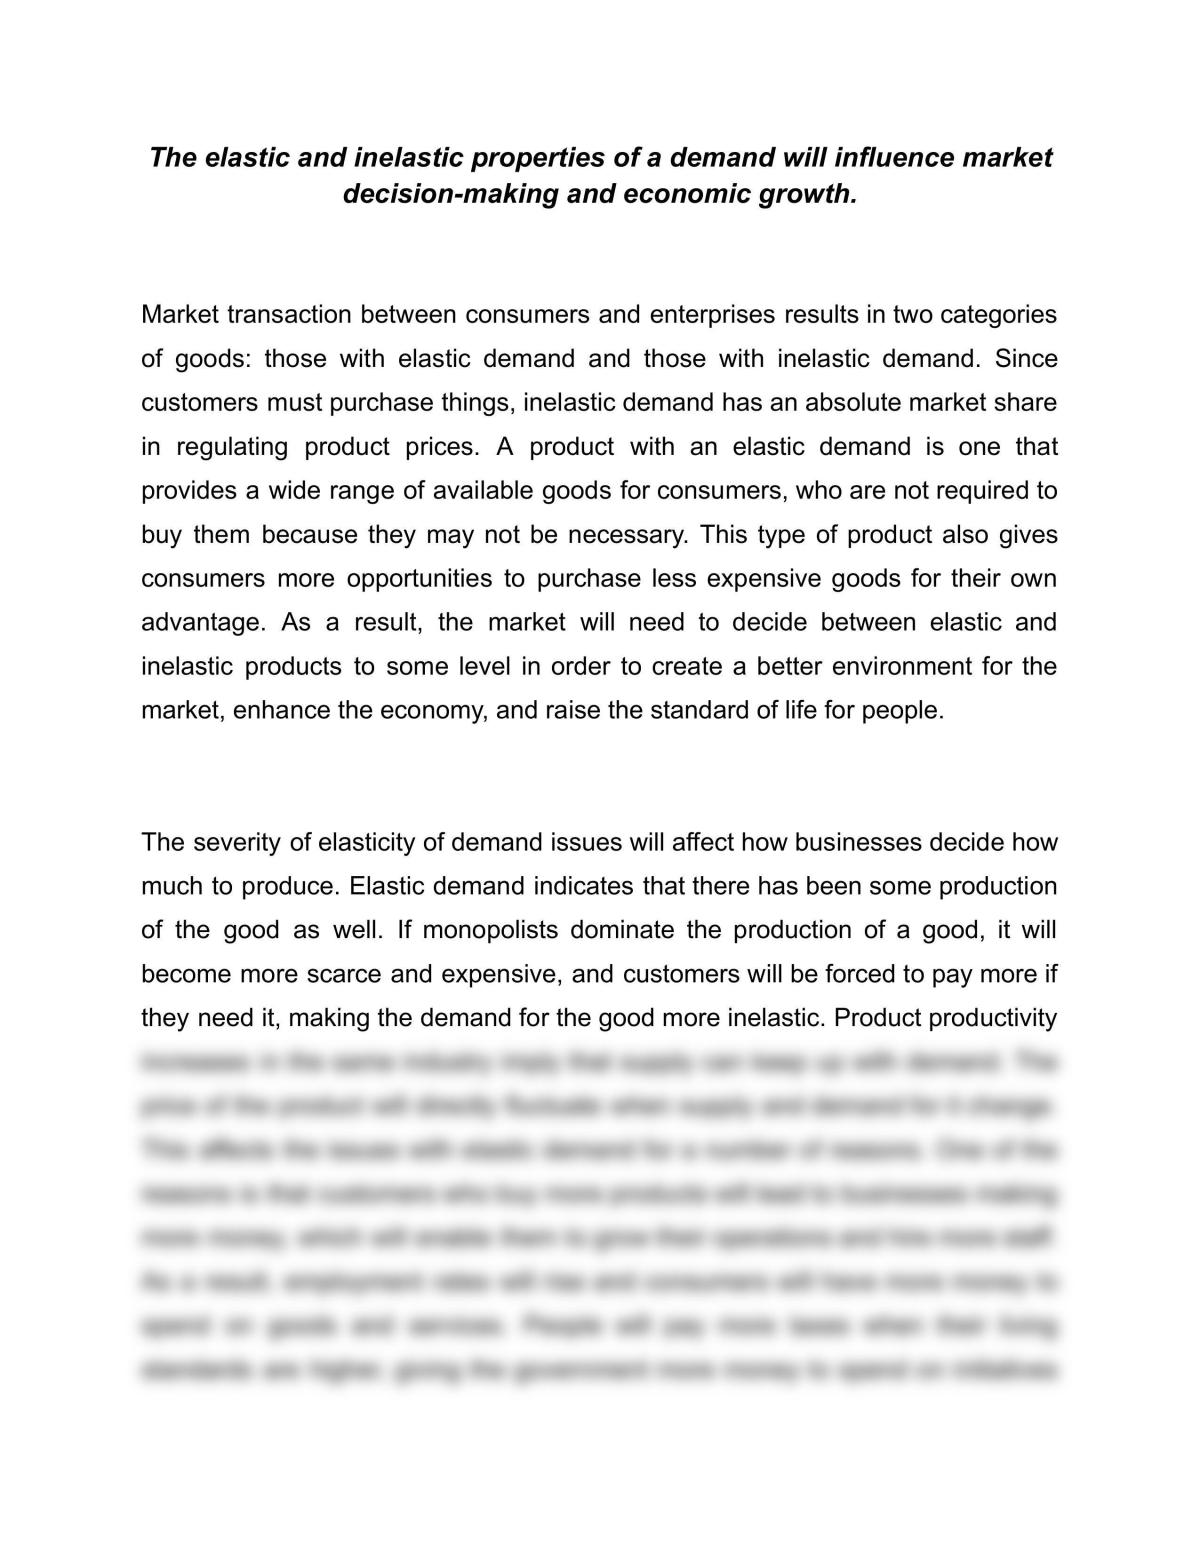 Economics Essay - The effect of elastic and inelastic demand on the economy - Page 1